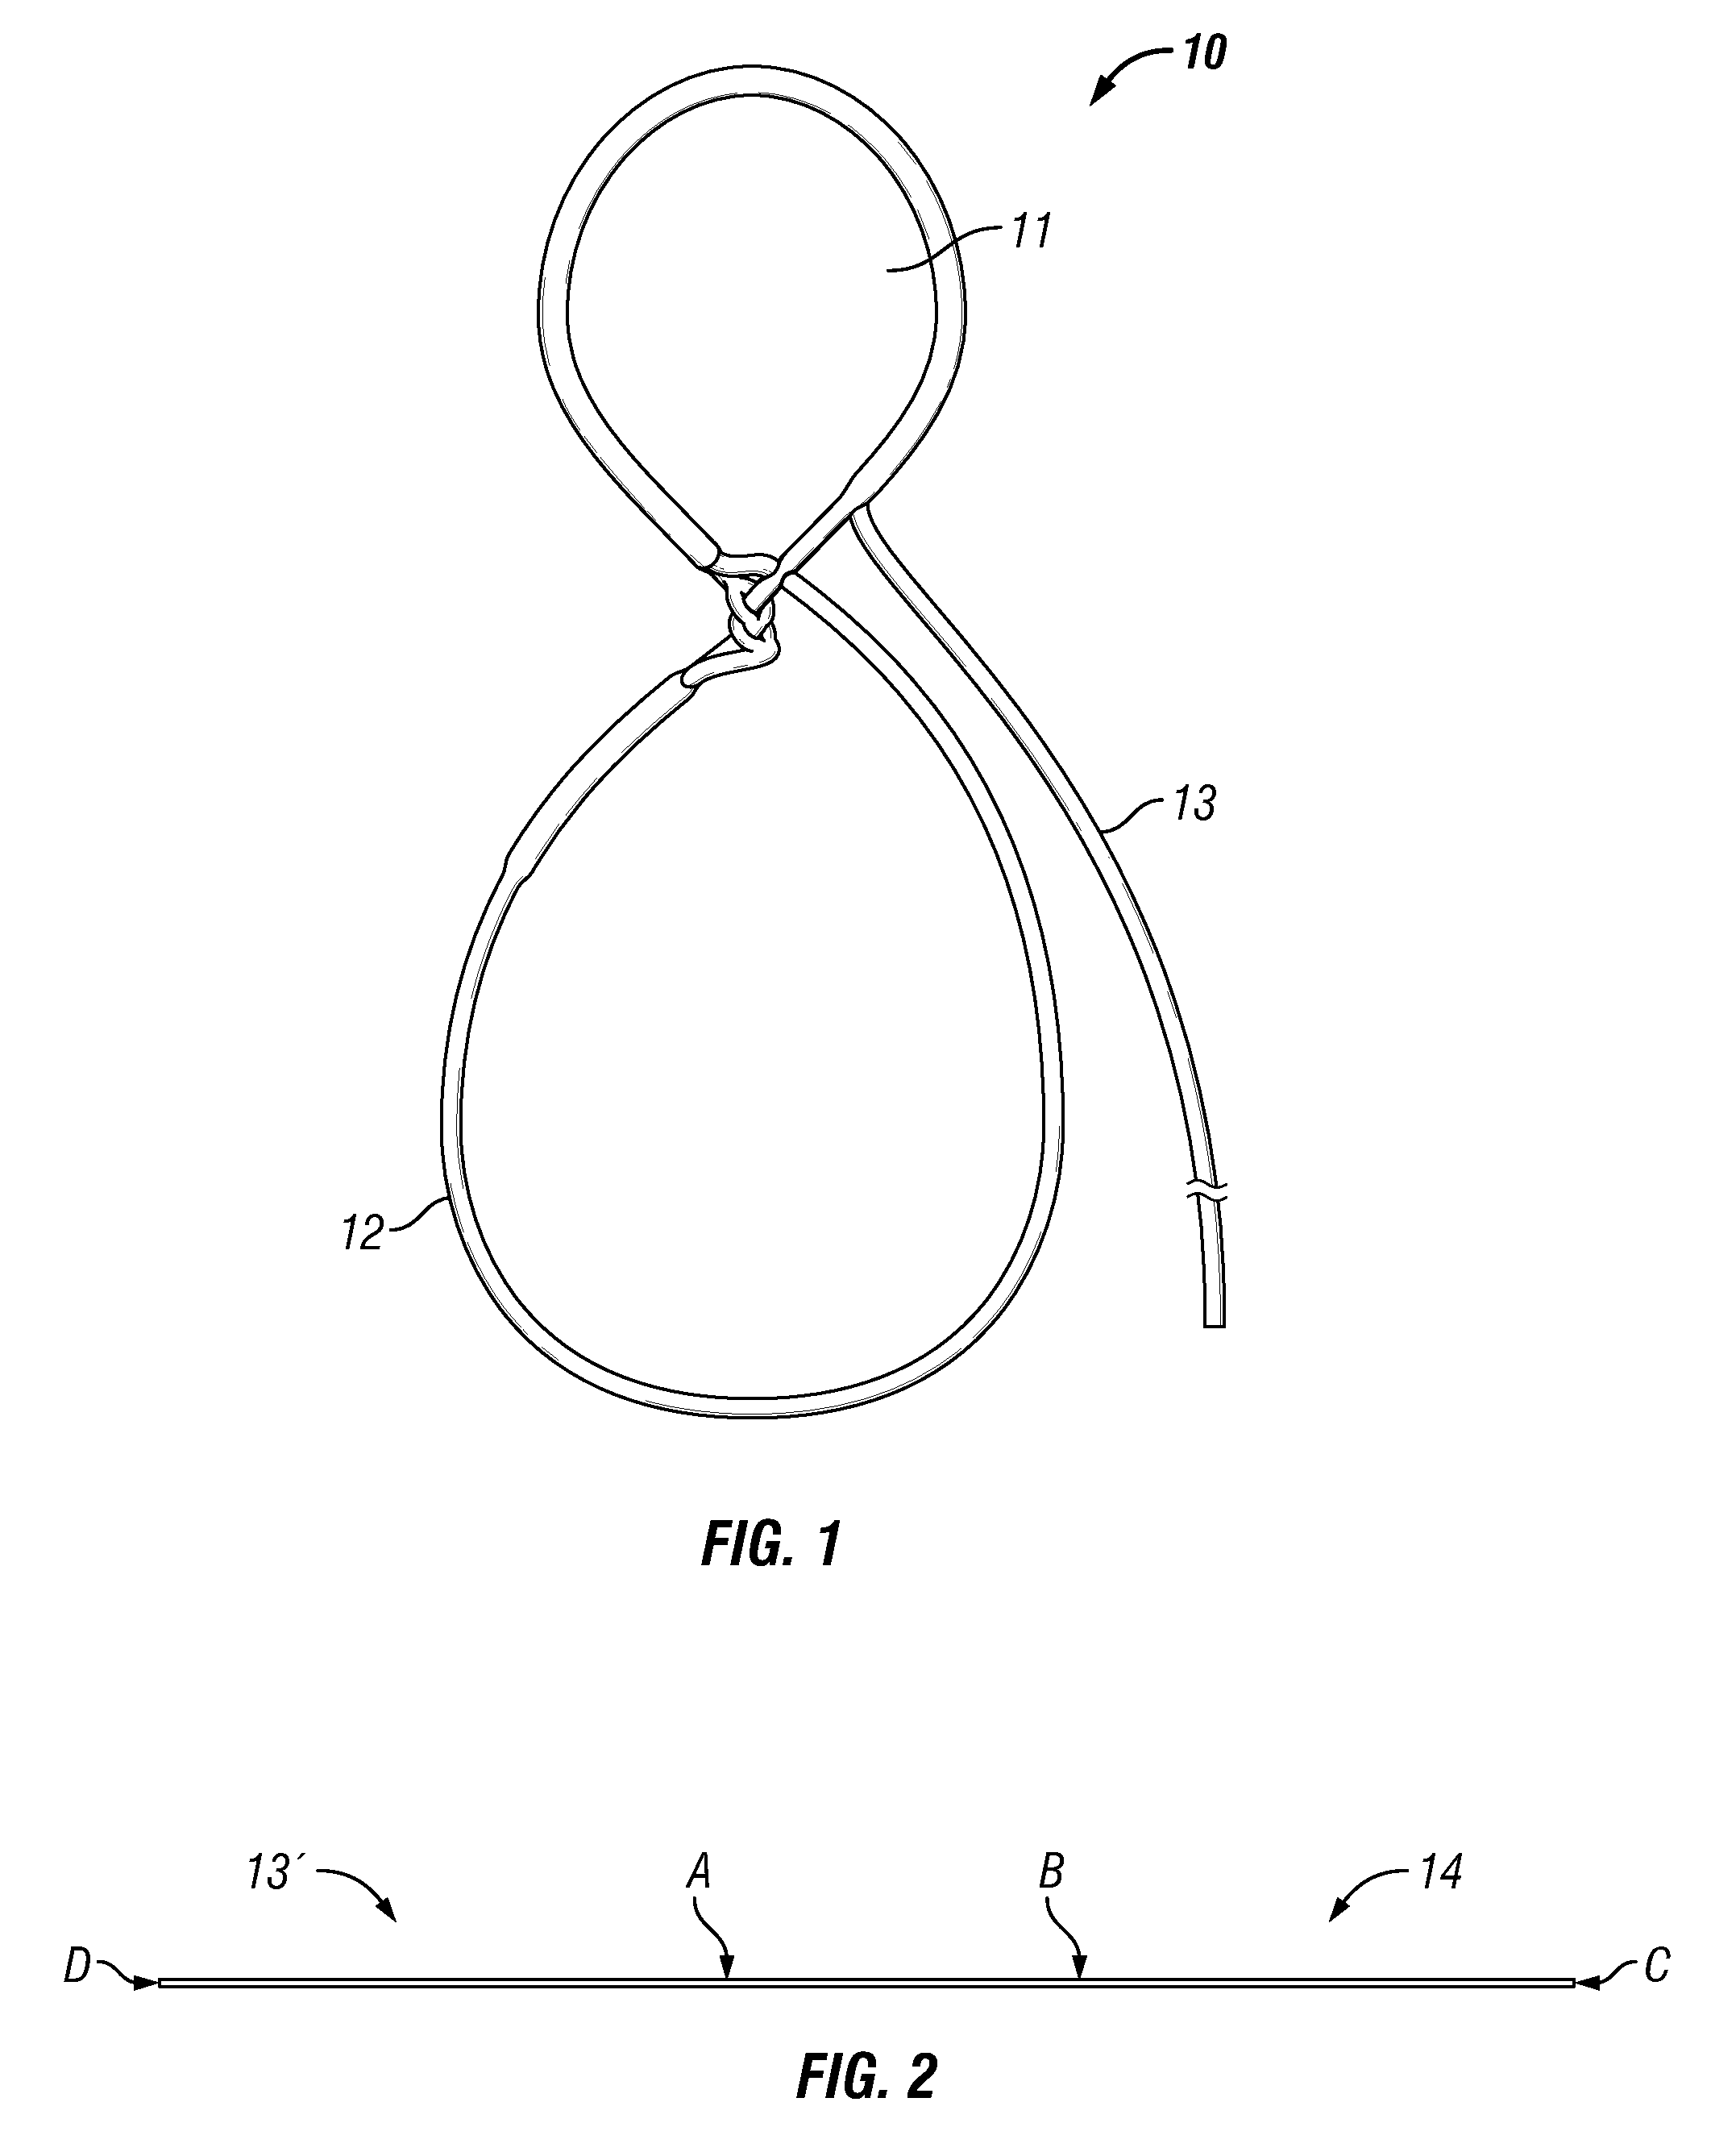 Adjustable continuous filament structure and method of manufacture and use